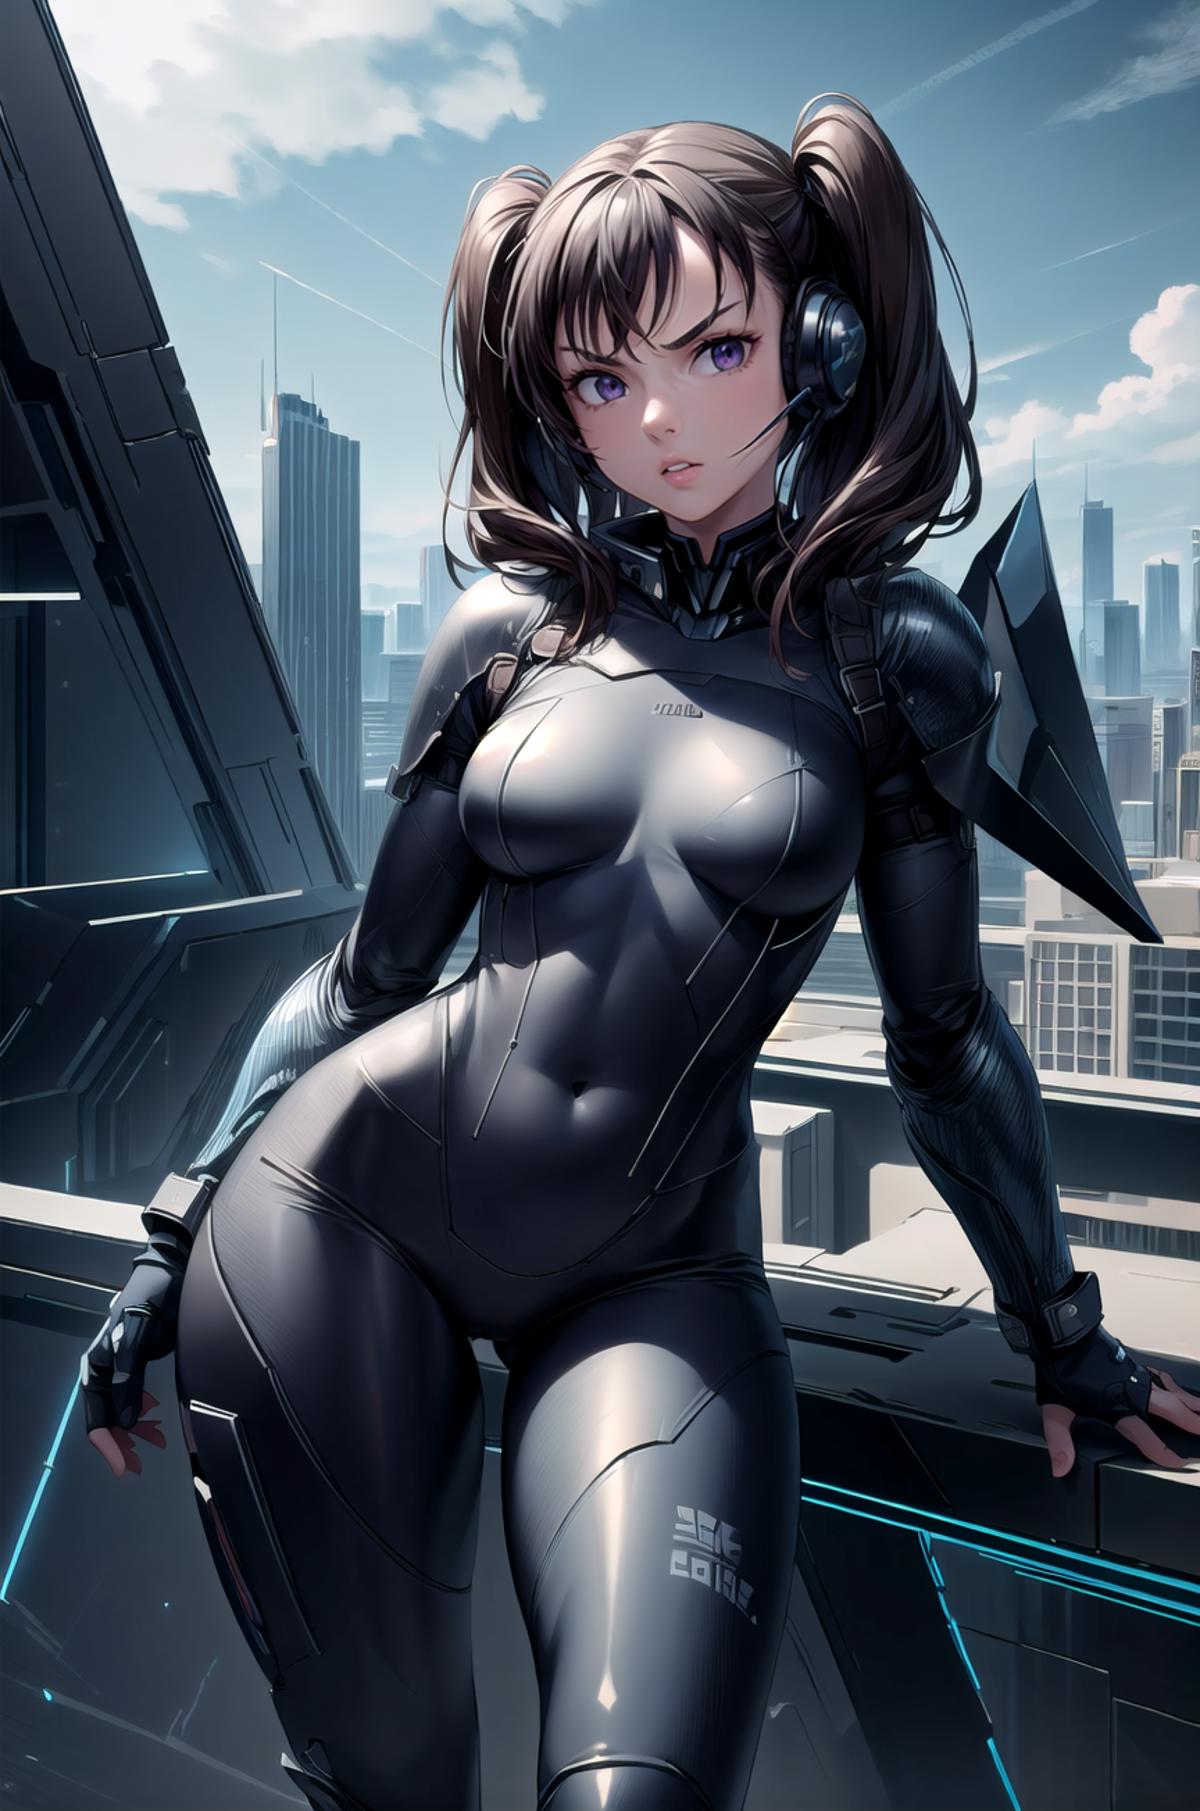 A woman in a futuristic outfit posing on a rooftop with a city skyline in the background.